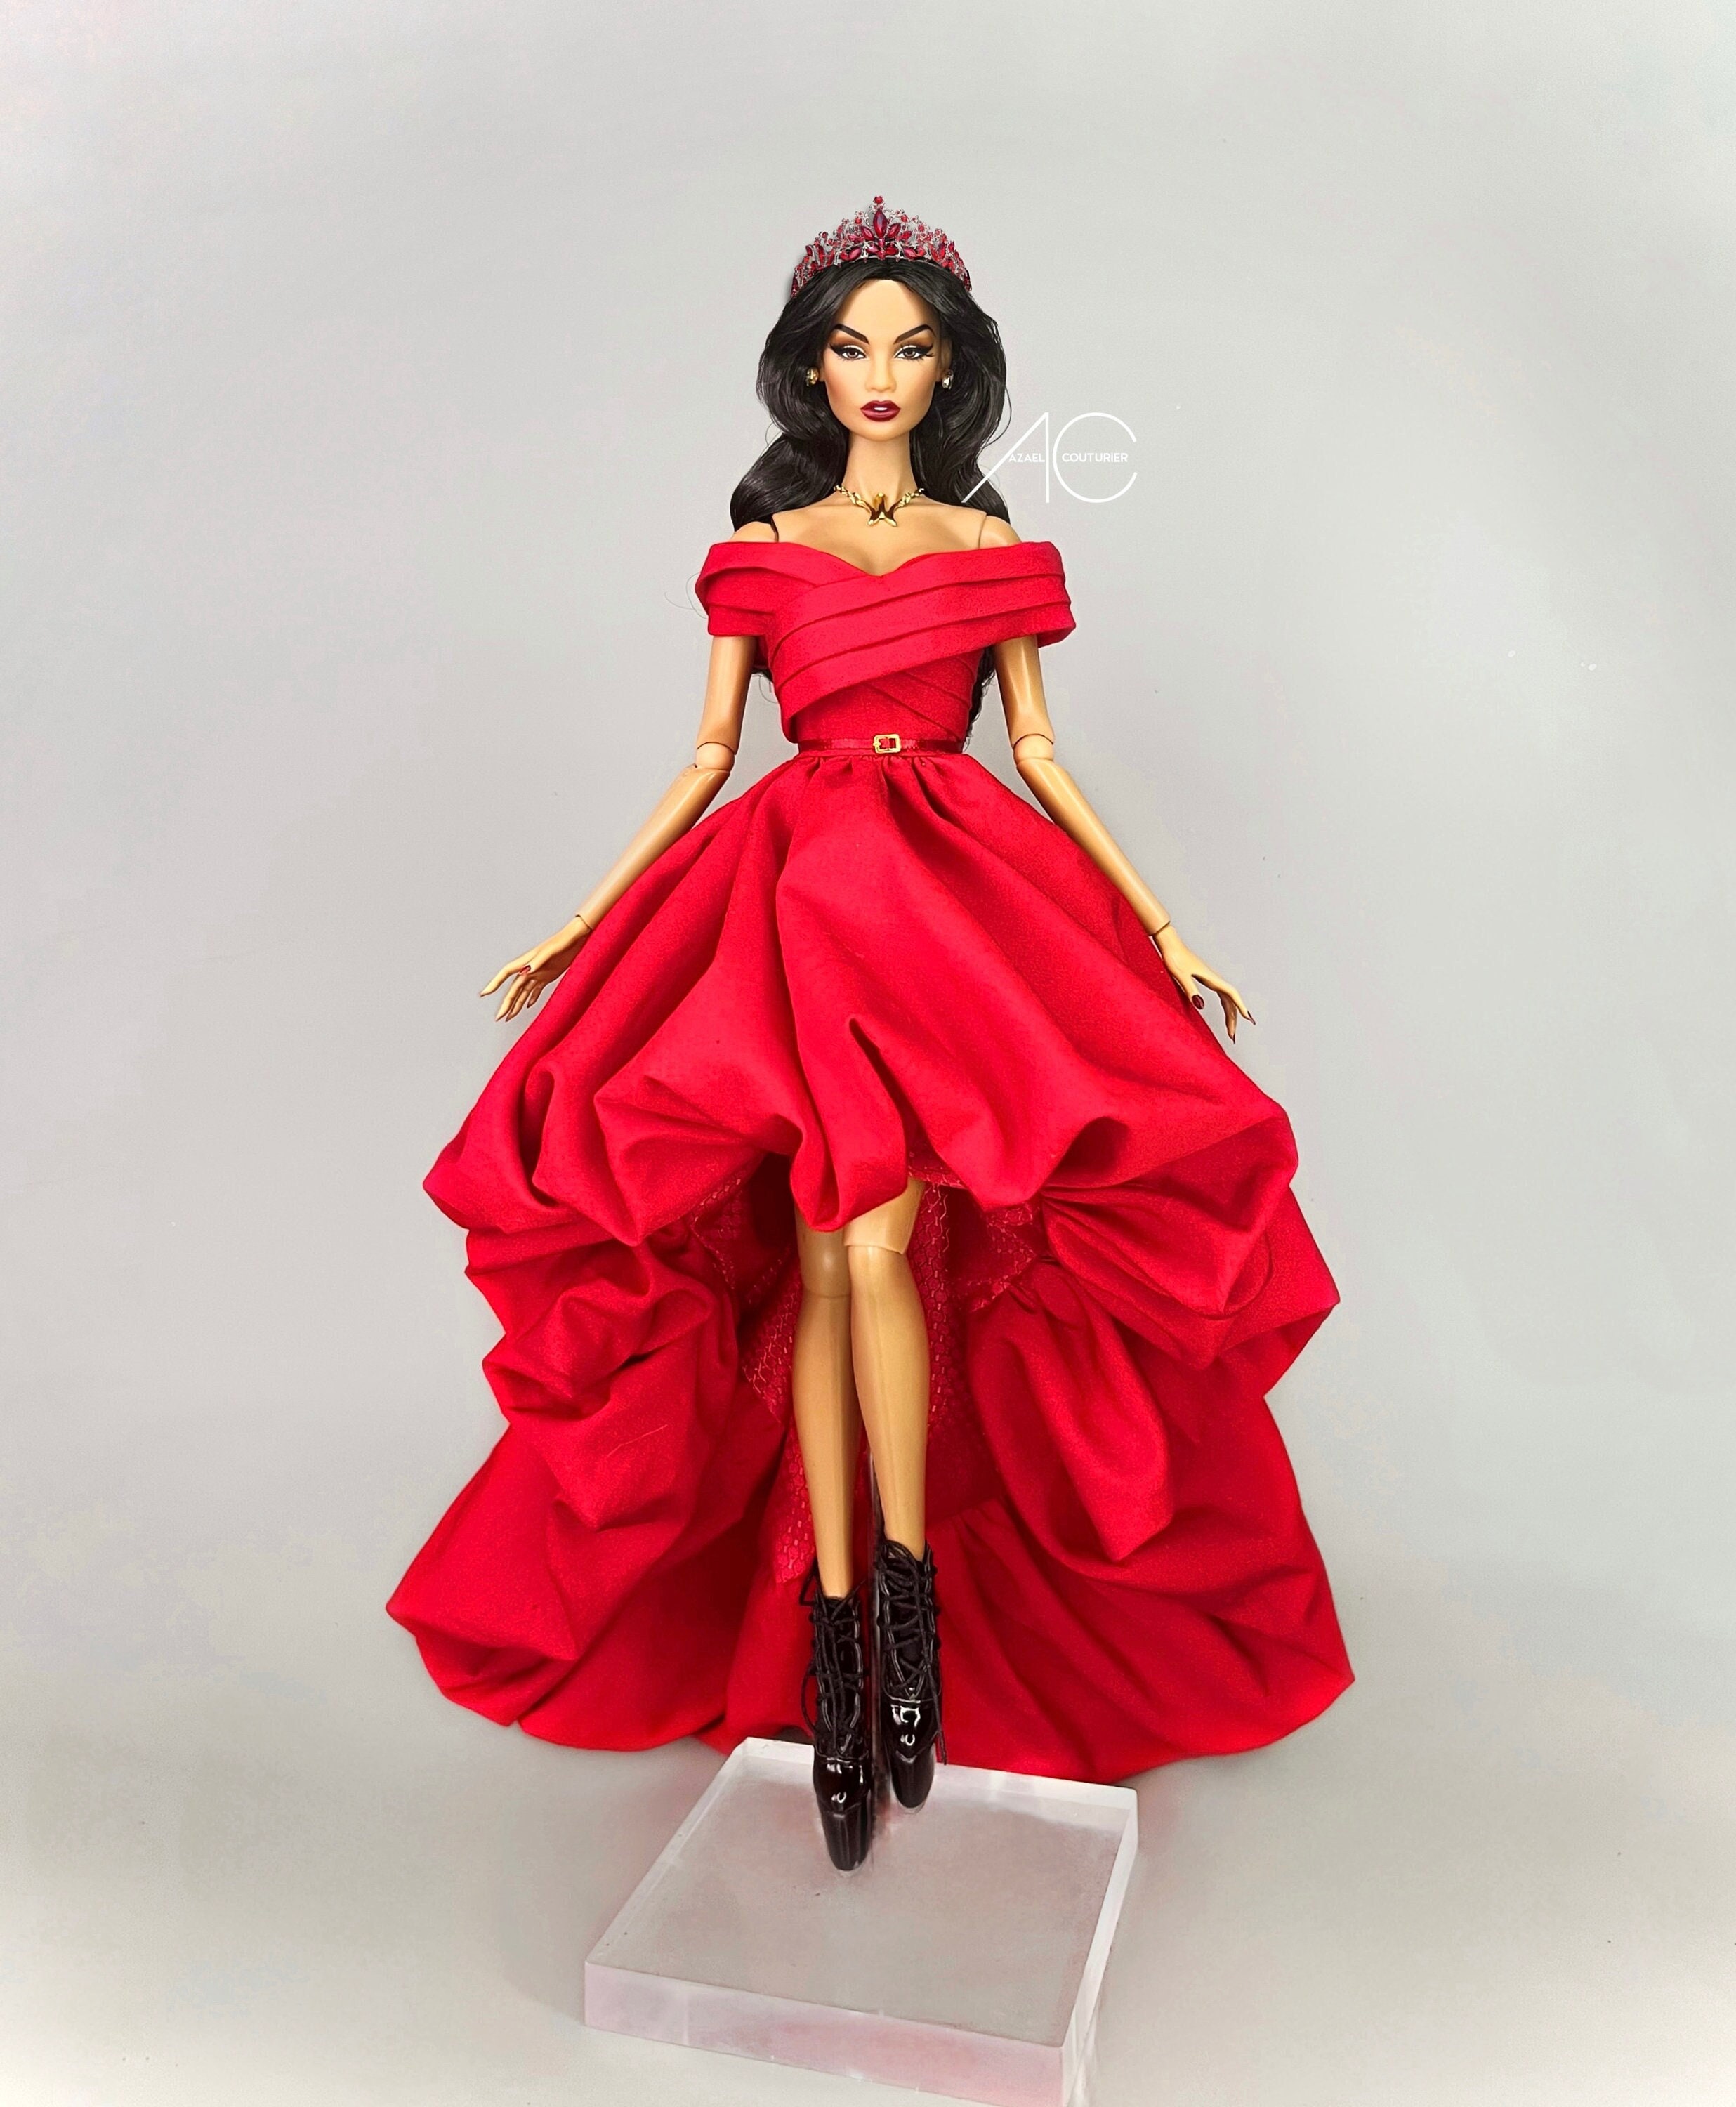 Amazon.com: BARWA 5 Pcs Handmade Doll Clothes Wedding Gowns Party Dresses  for 11.5 inch Dolls : Toys & Games